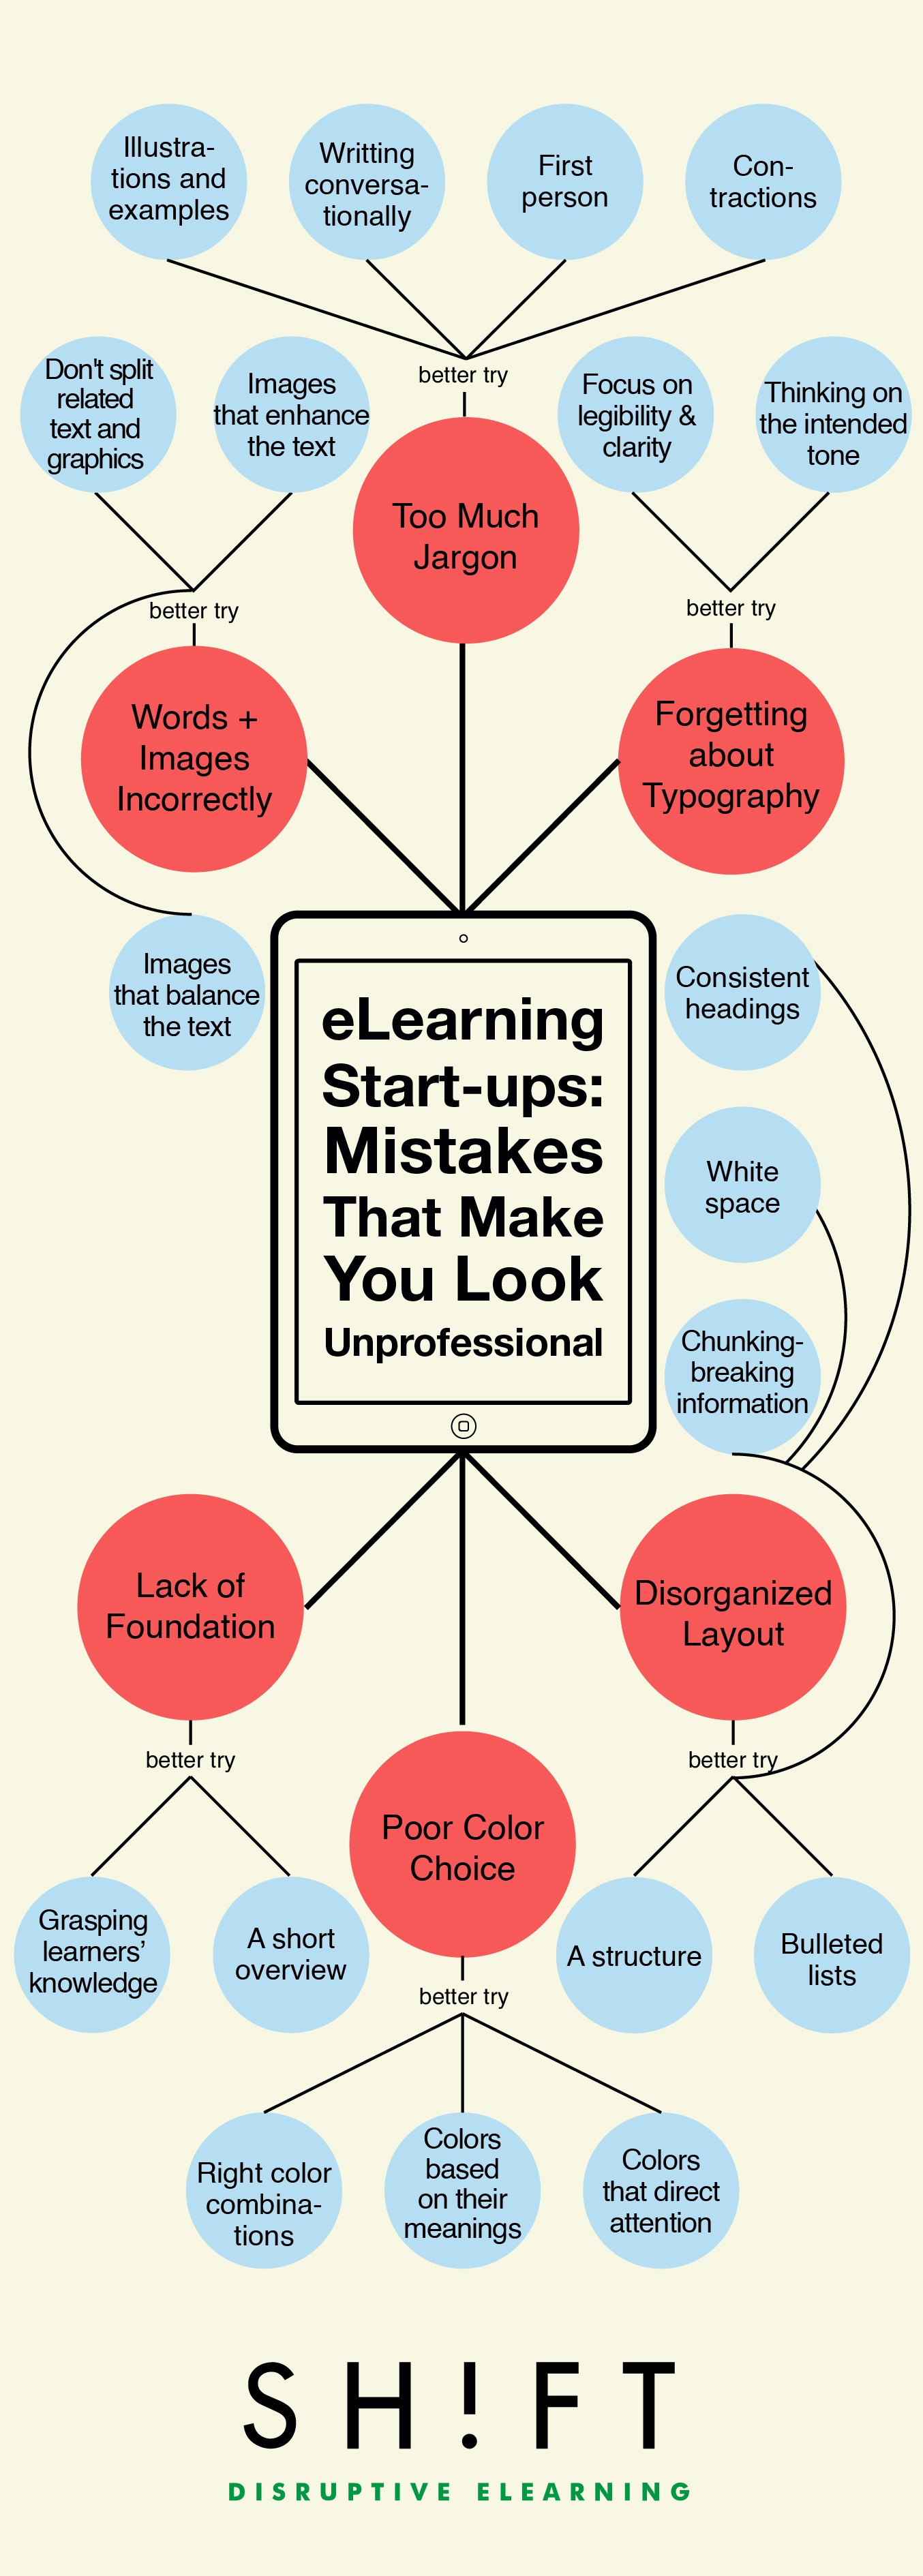 The 6 eLearning Start-ups Mistakes Infographic